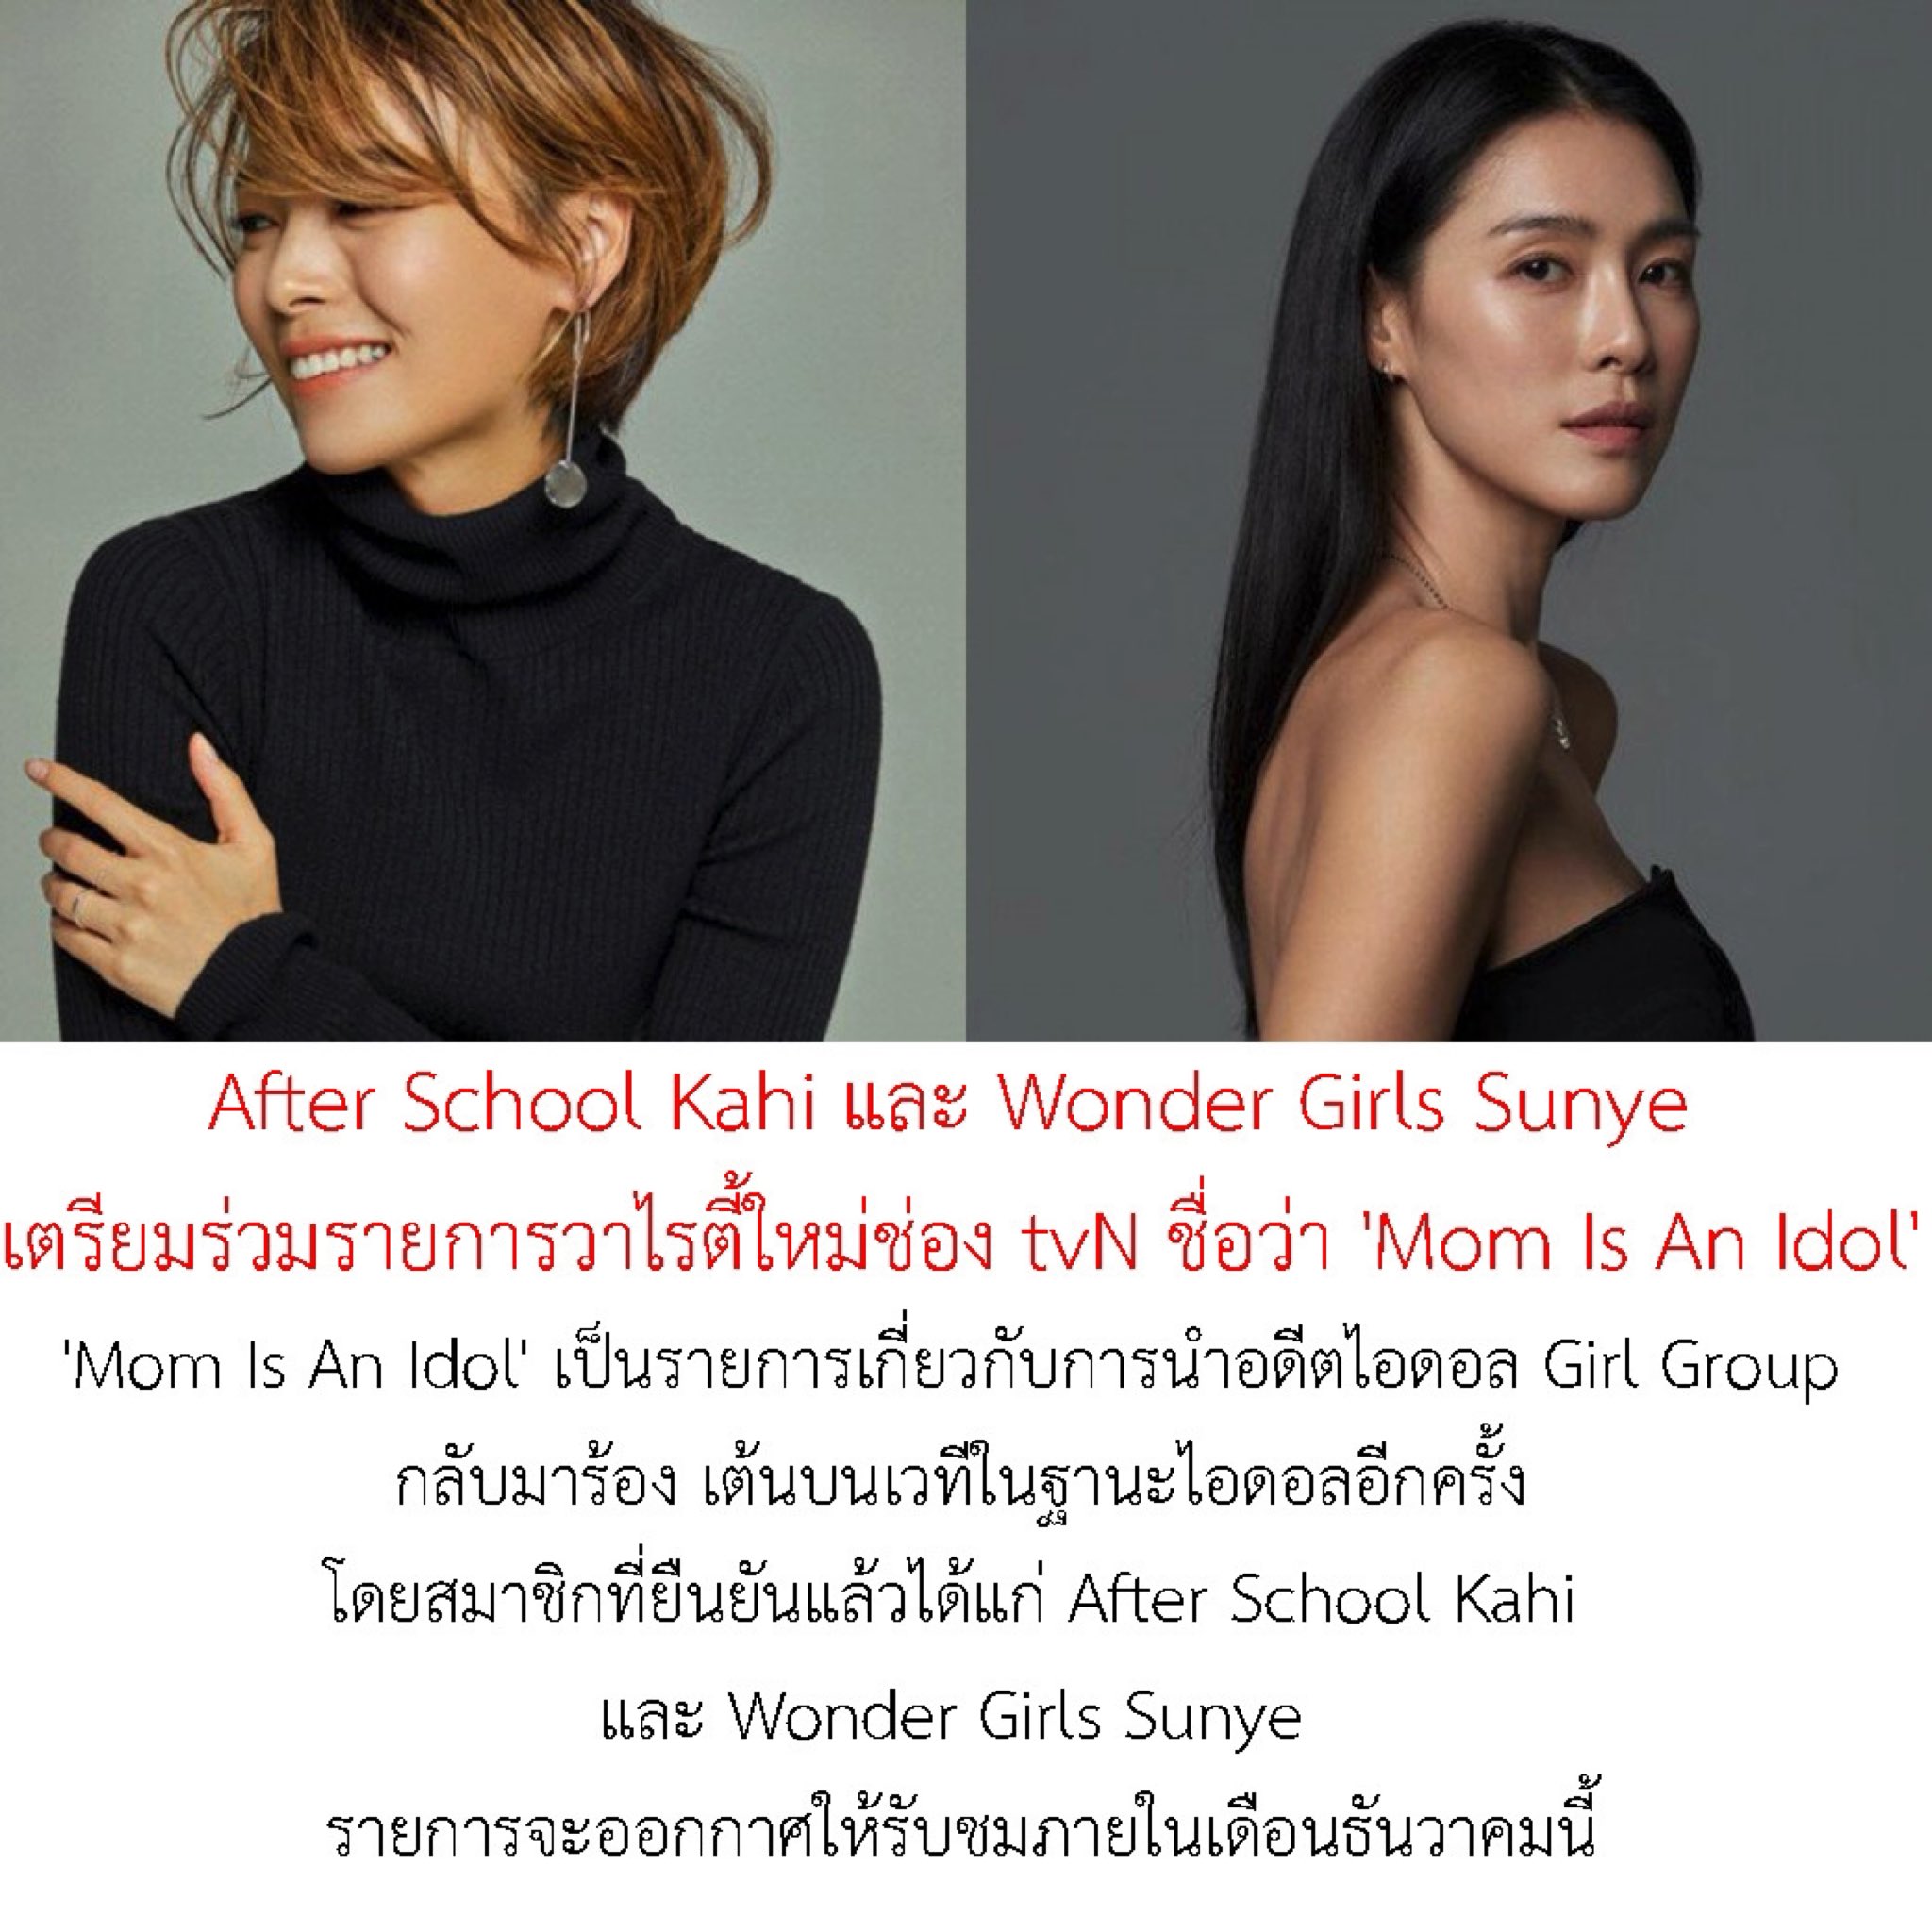 After School's Kahi And Wonder Girls' Sunye To Appear On Amazing Saturday